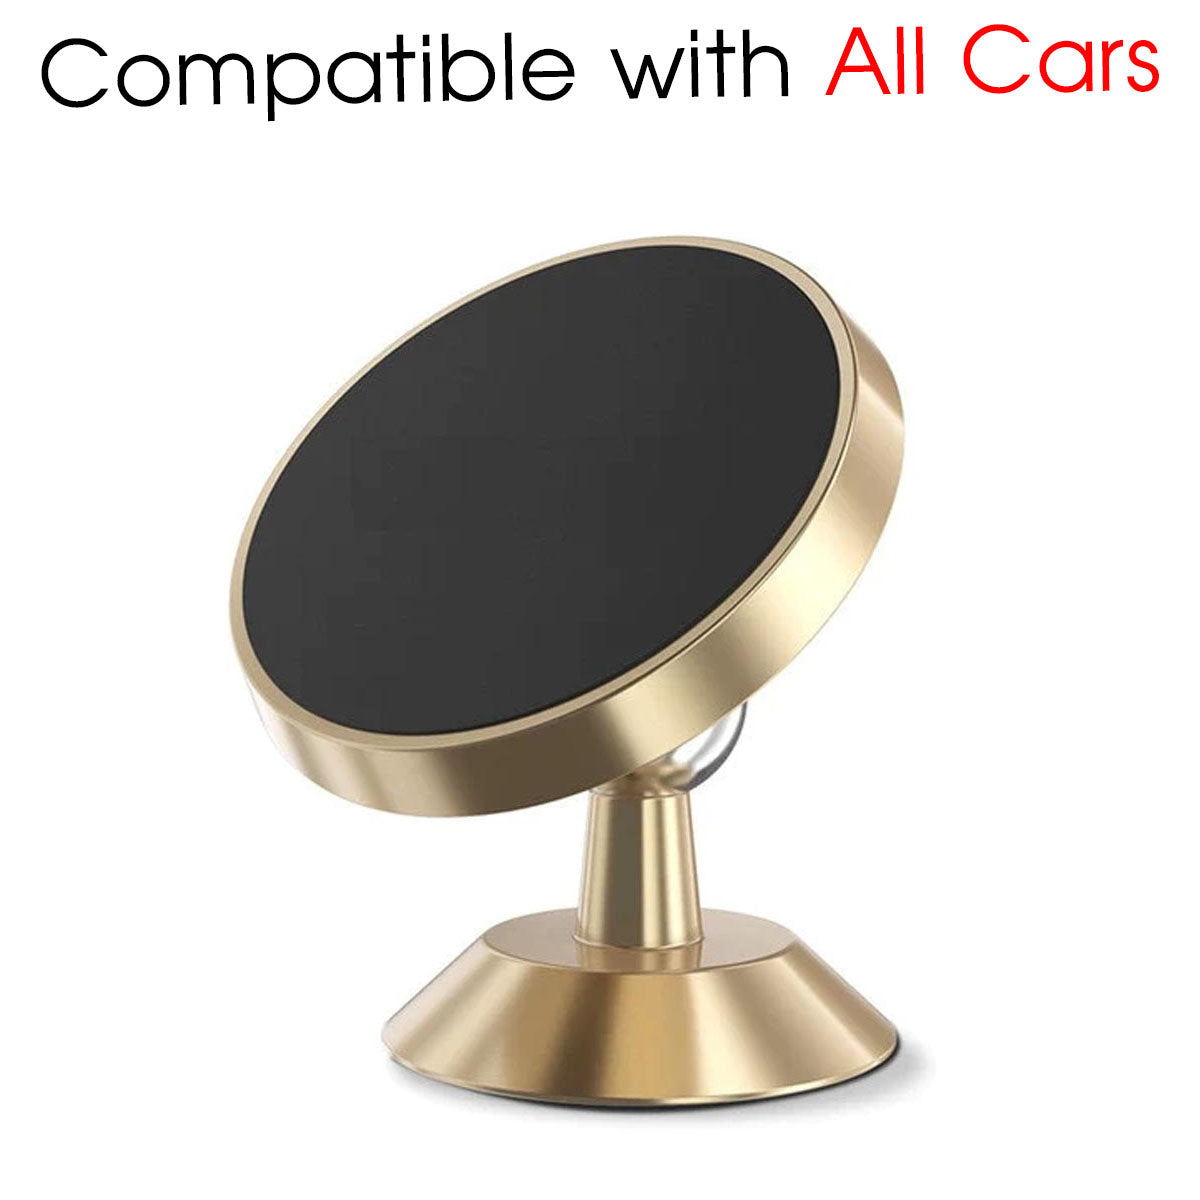 [2 Pack ] Magnetic Phone Mount, Custom For Cars, [ Super Strong Magnet ] [ with 4 Metal Plate ] car Magnetic Phone Holder, [ 360° Rotation ] Universal Dashboard car Mount Fits All Cell Phones, Car Accessories FJ13982 - Delicate Leather